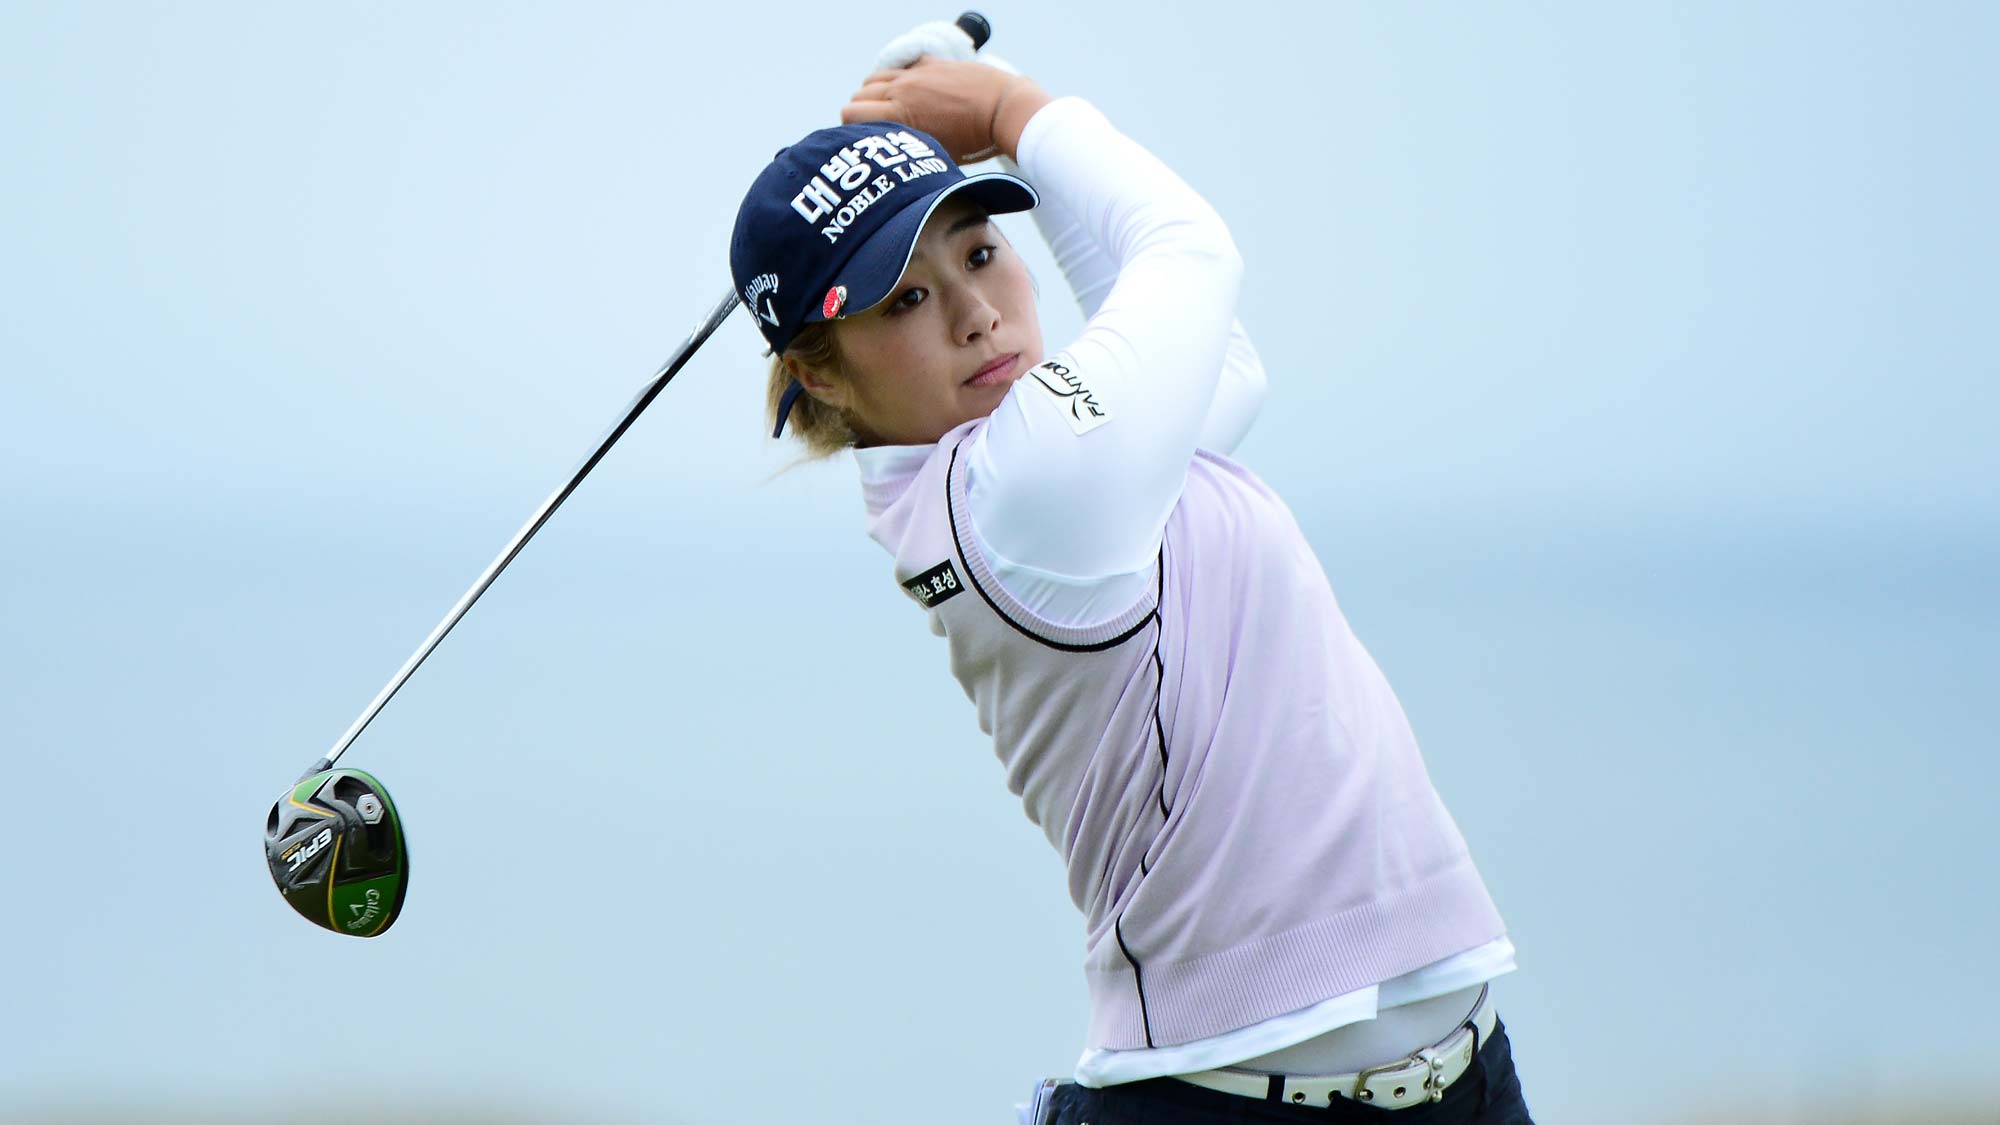 Jeongeun Lee6 of Korea plays her tee shot at the 6th hole during the final day of the Aberdeen Standard Investment Scottish Open 